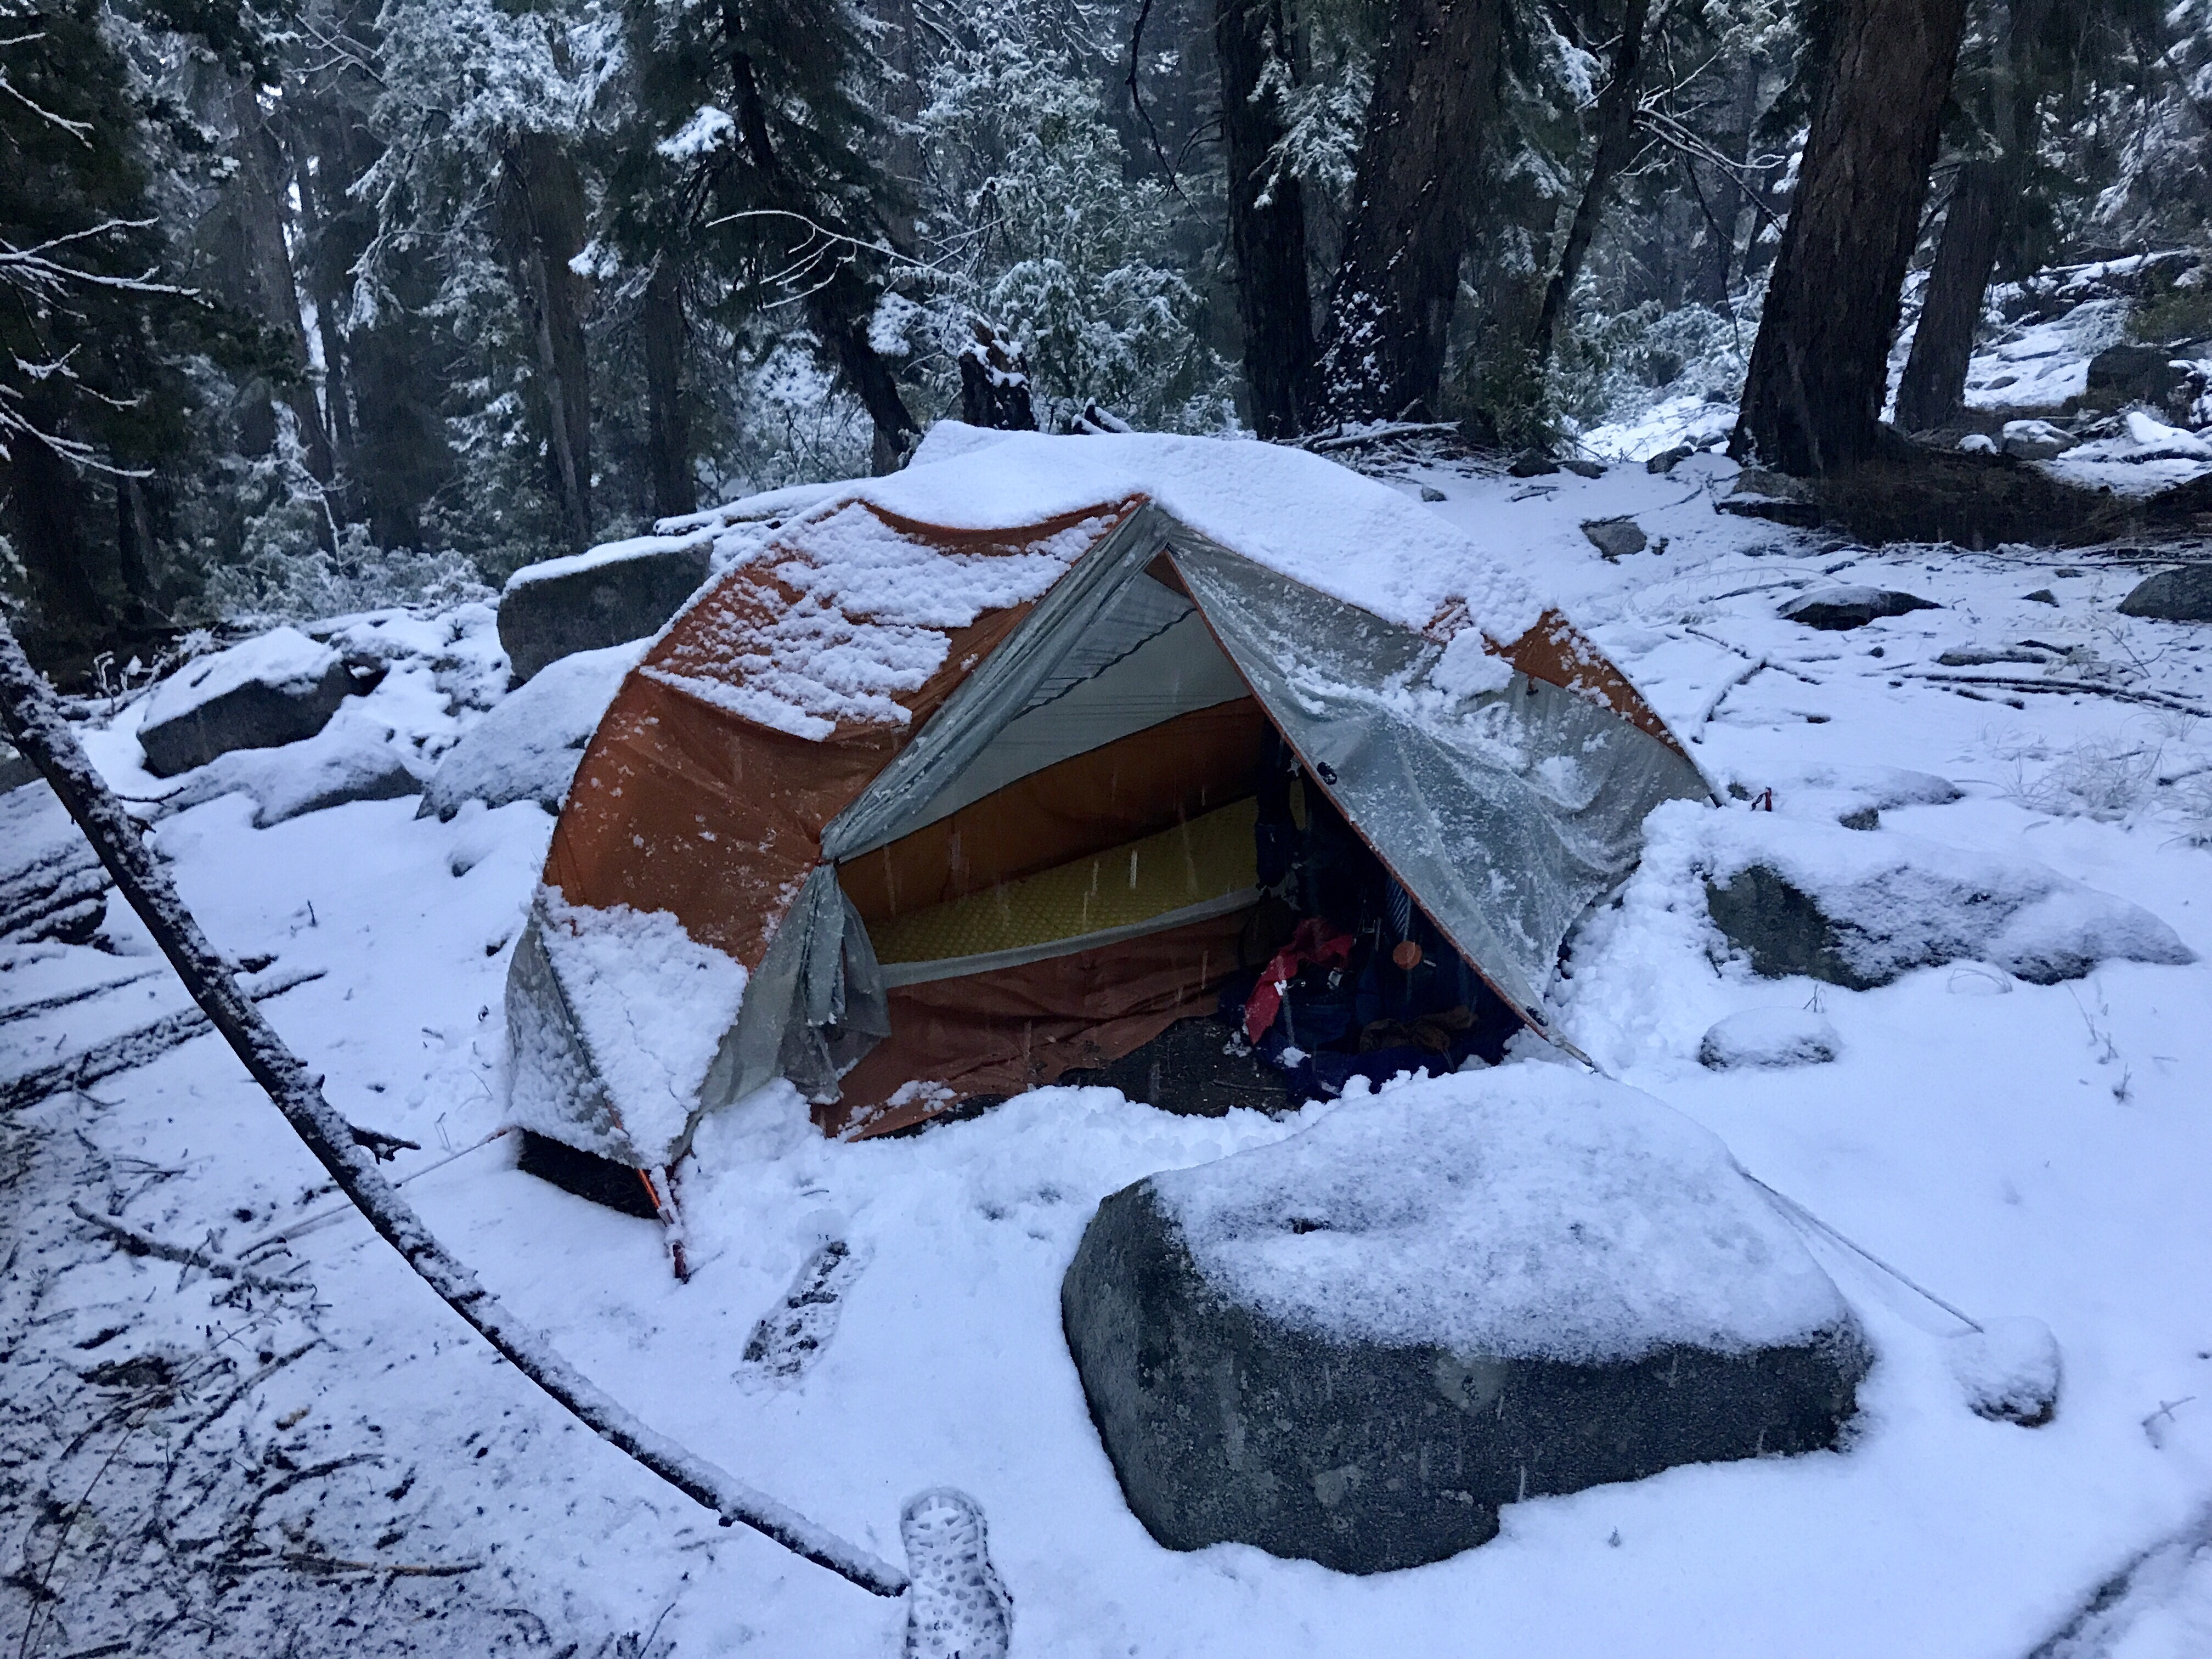 PCT Day 161 – Surprise Snowfall in the Sierras